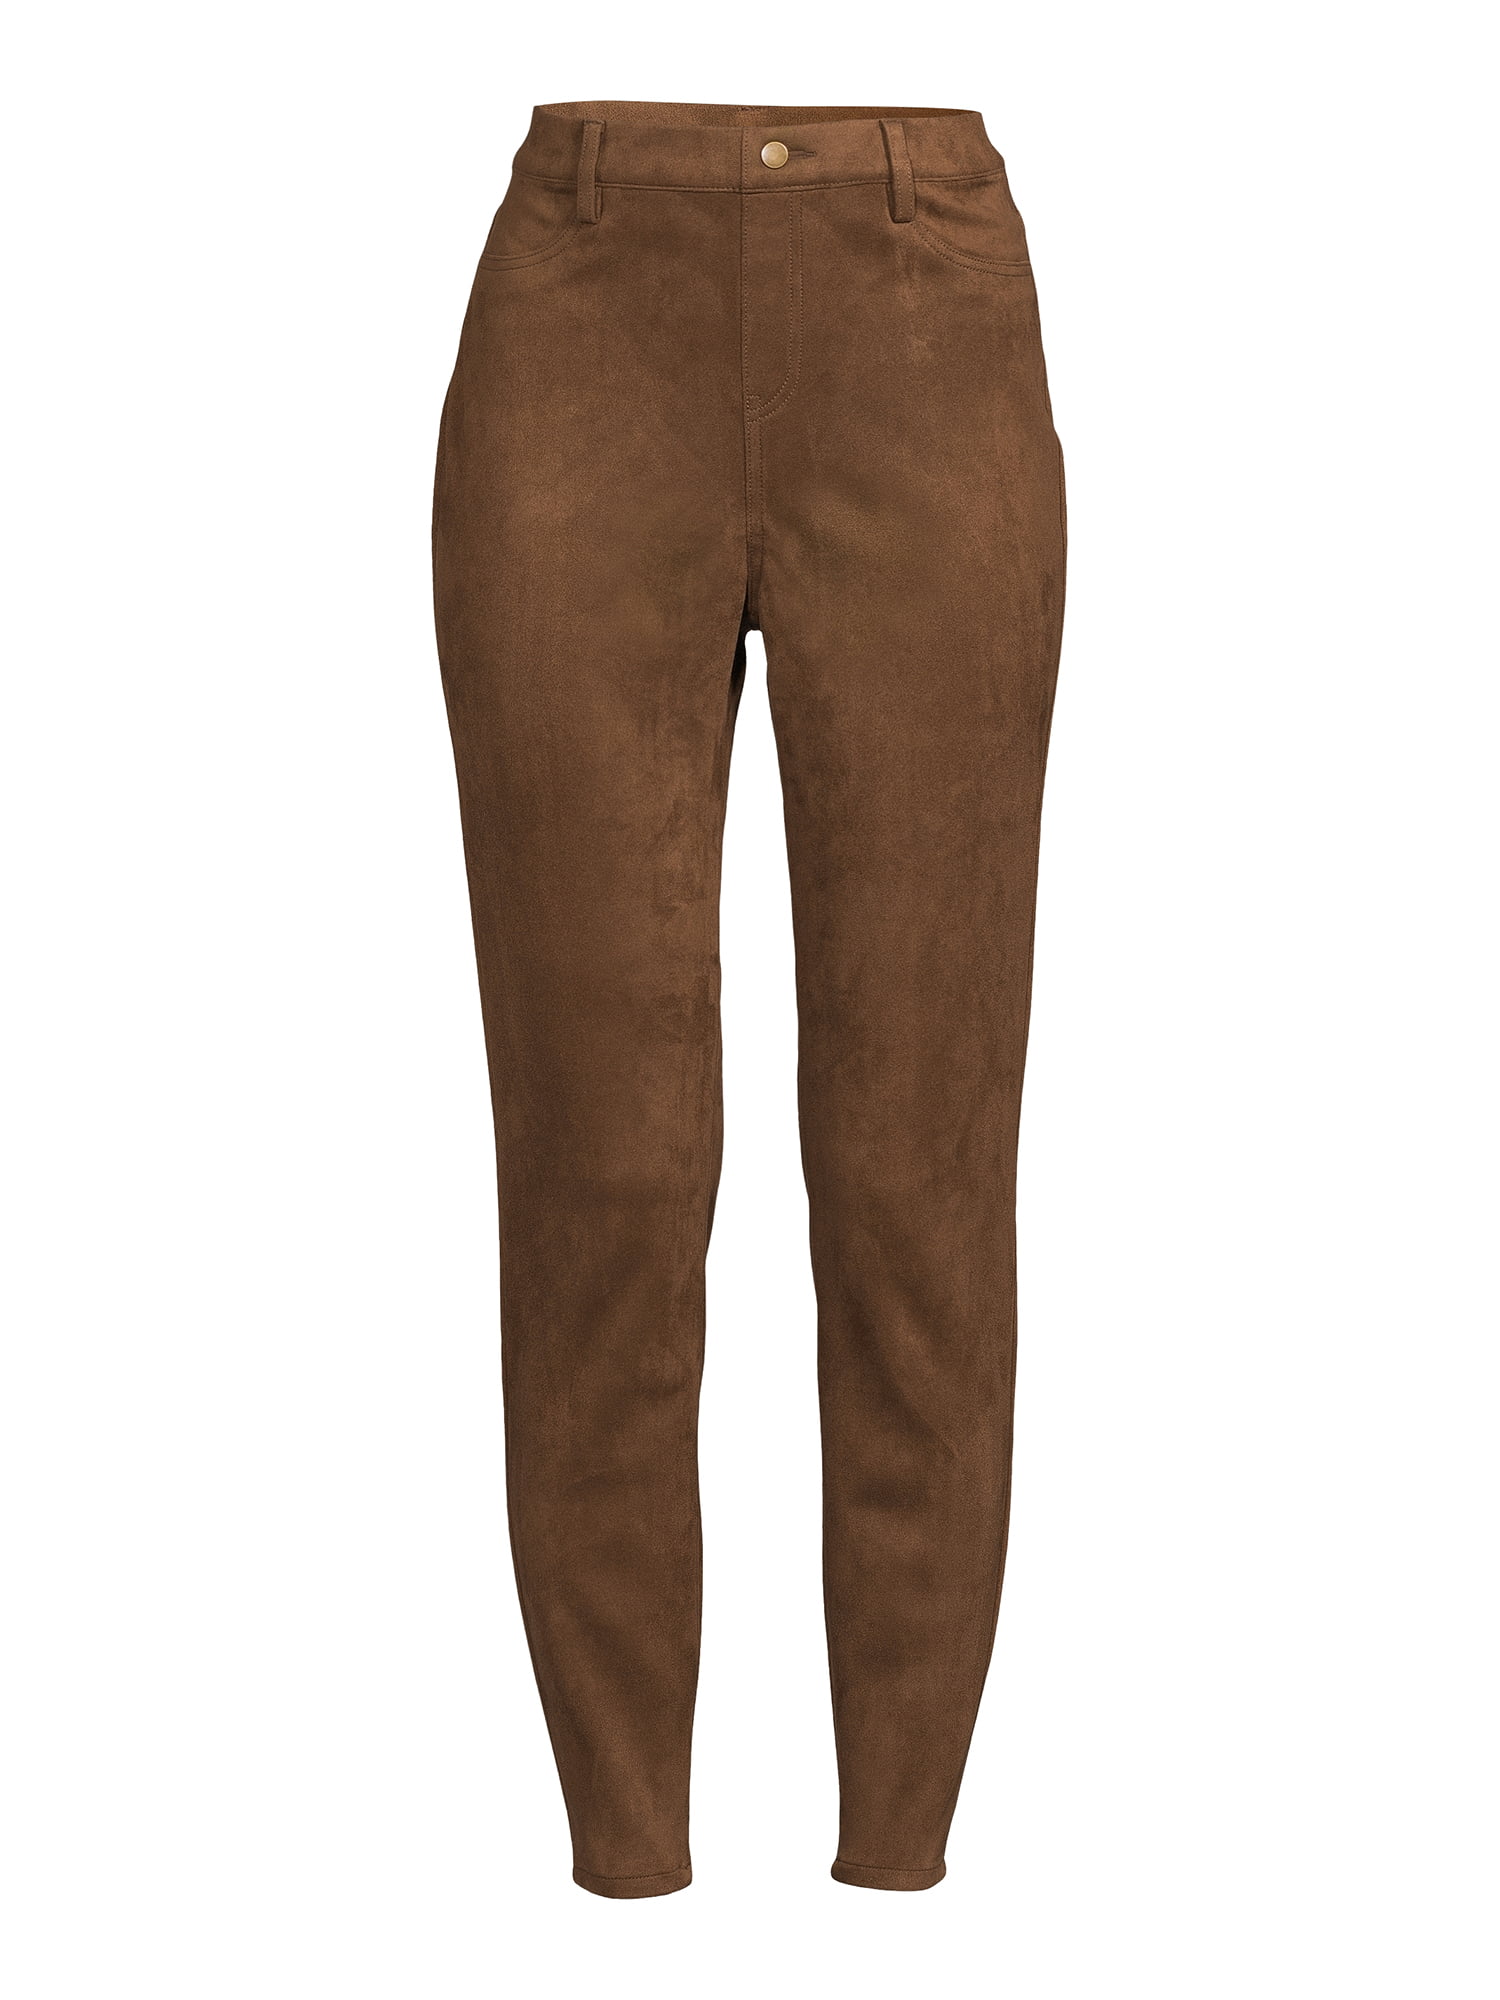 womens trousers with eco leather on high quality suede  Arturela